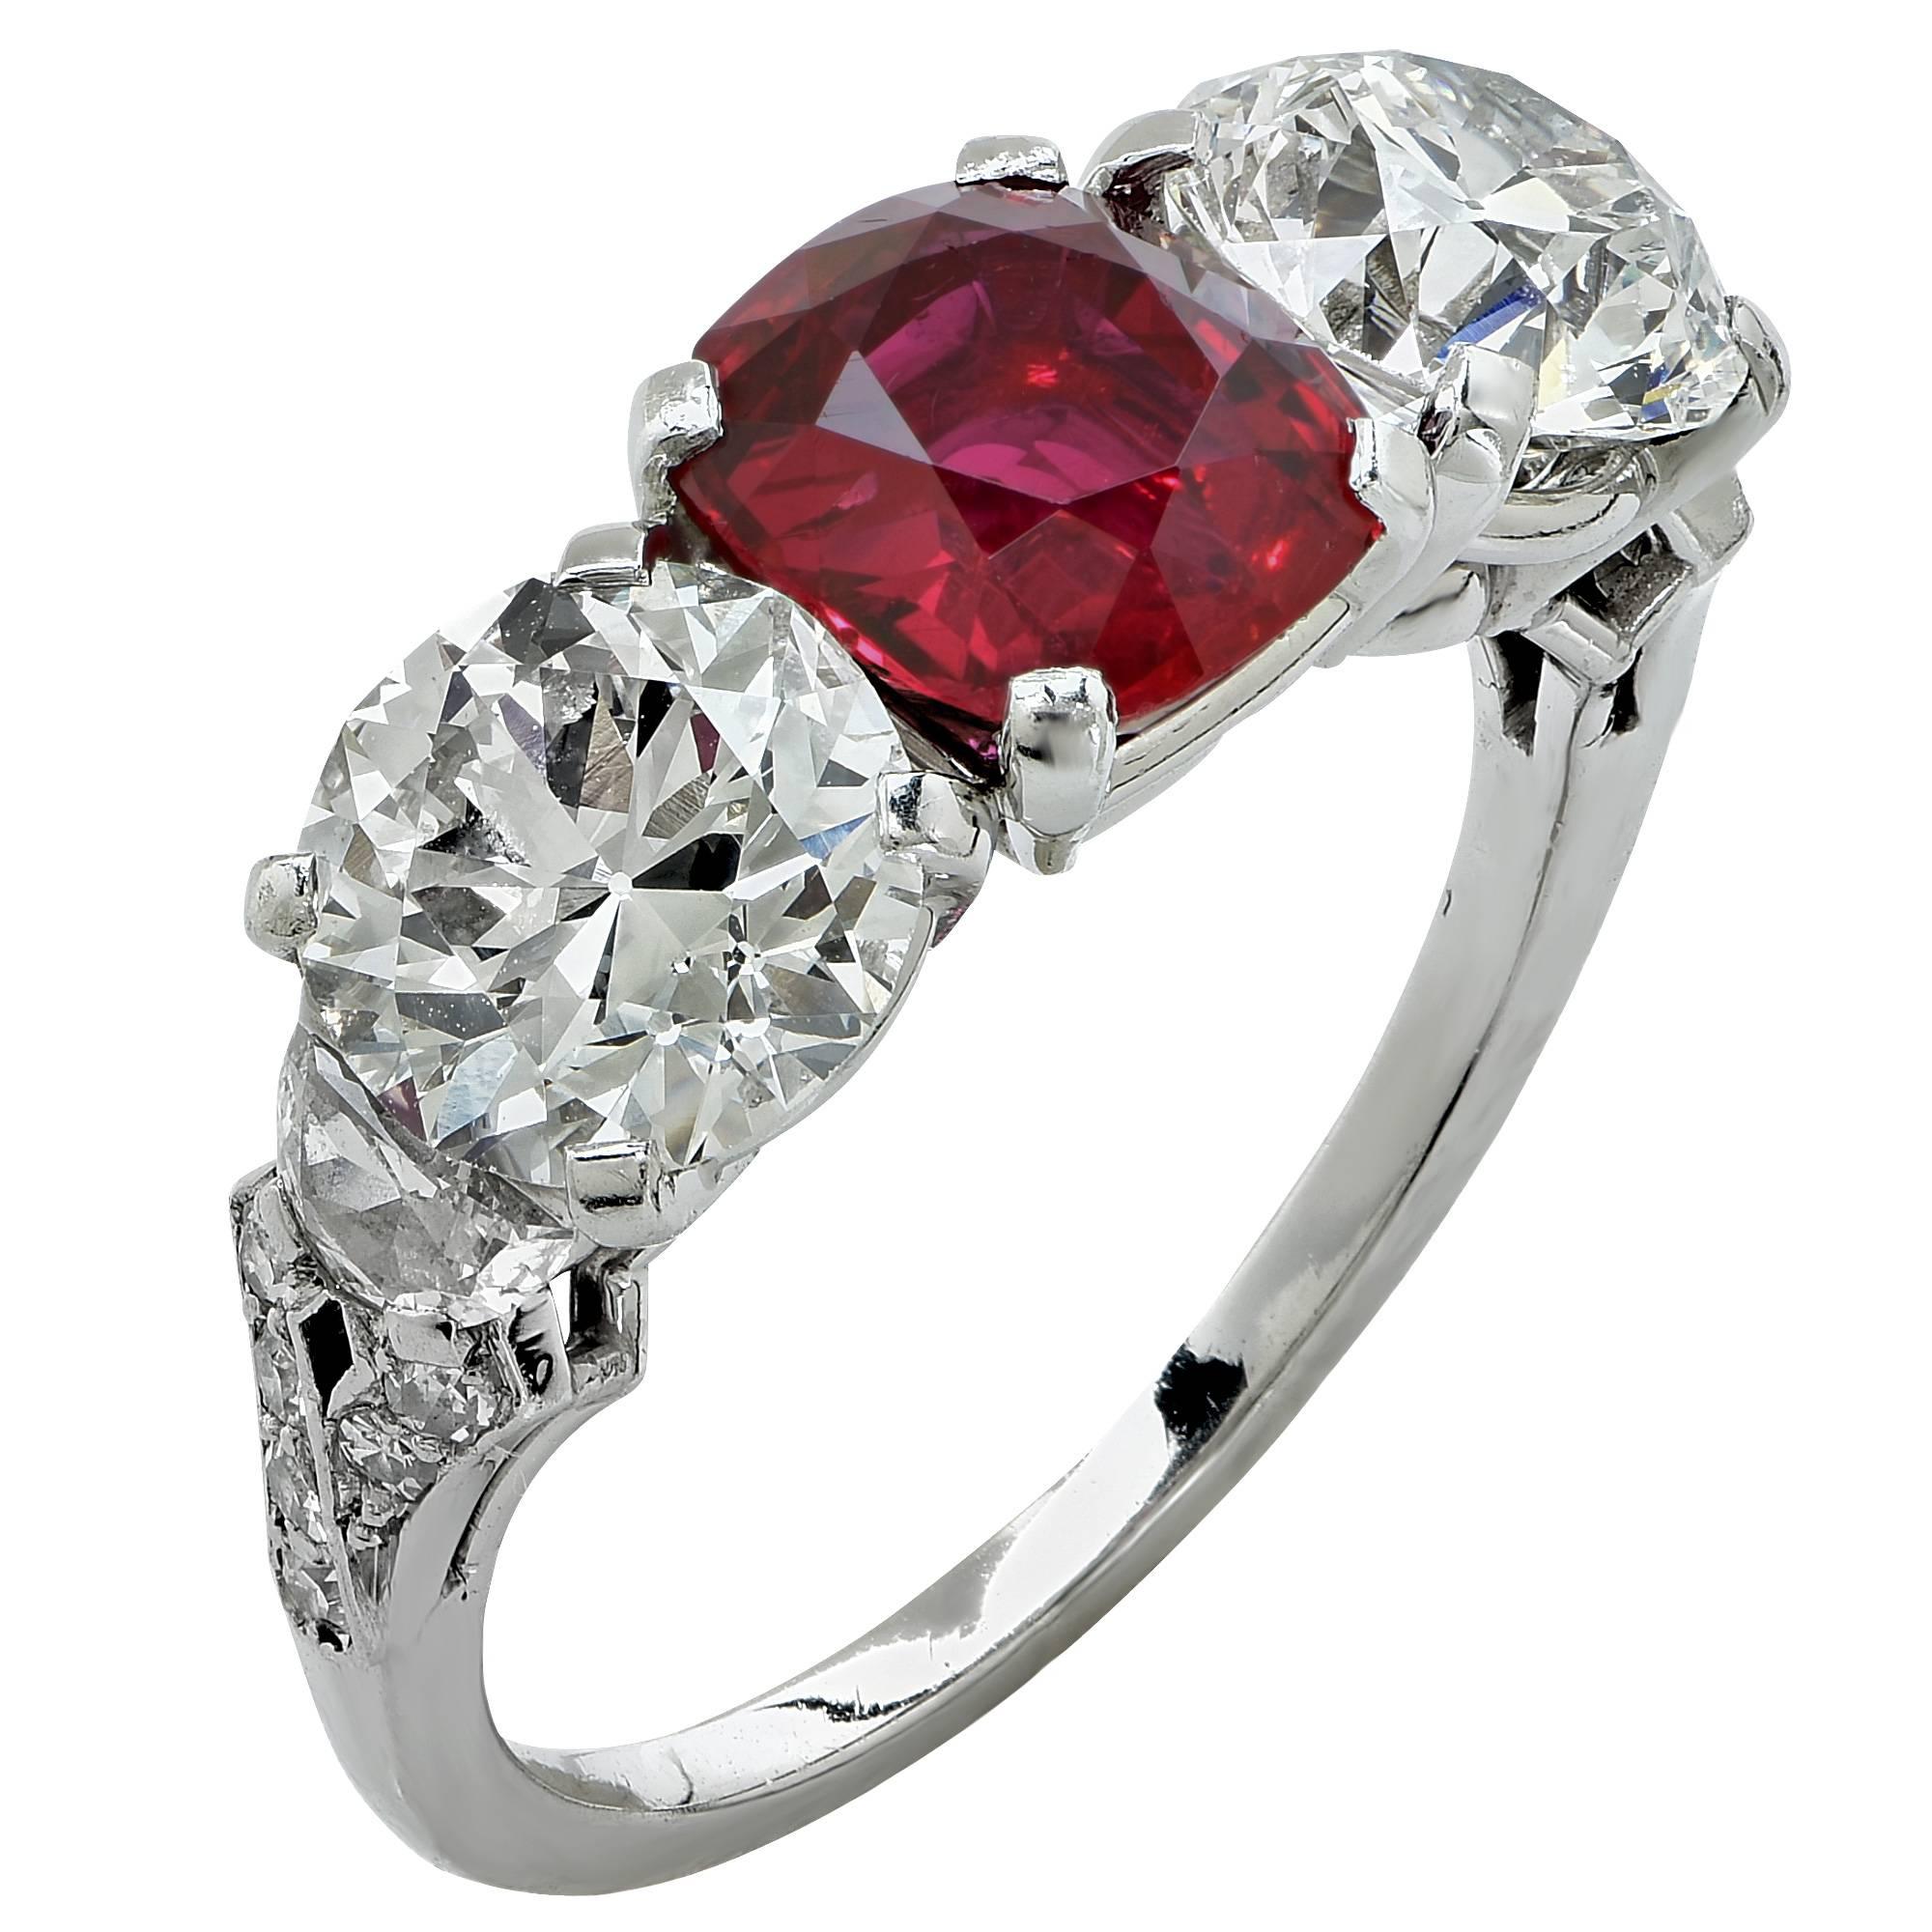 Platinum Art Deco ring contaning a vibrant red ruby cushion cut weighing approximately 2cts flanked by 2 European cut diamonds weighing approximately 2.60cts G-H color and VS clarity accented by 2 half moon cut diamonds approximately .30ct and 12